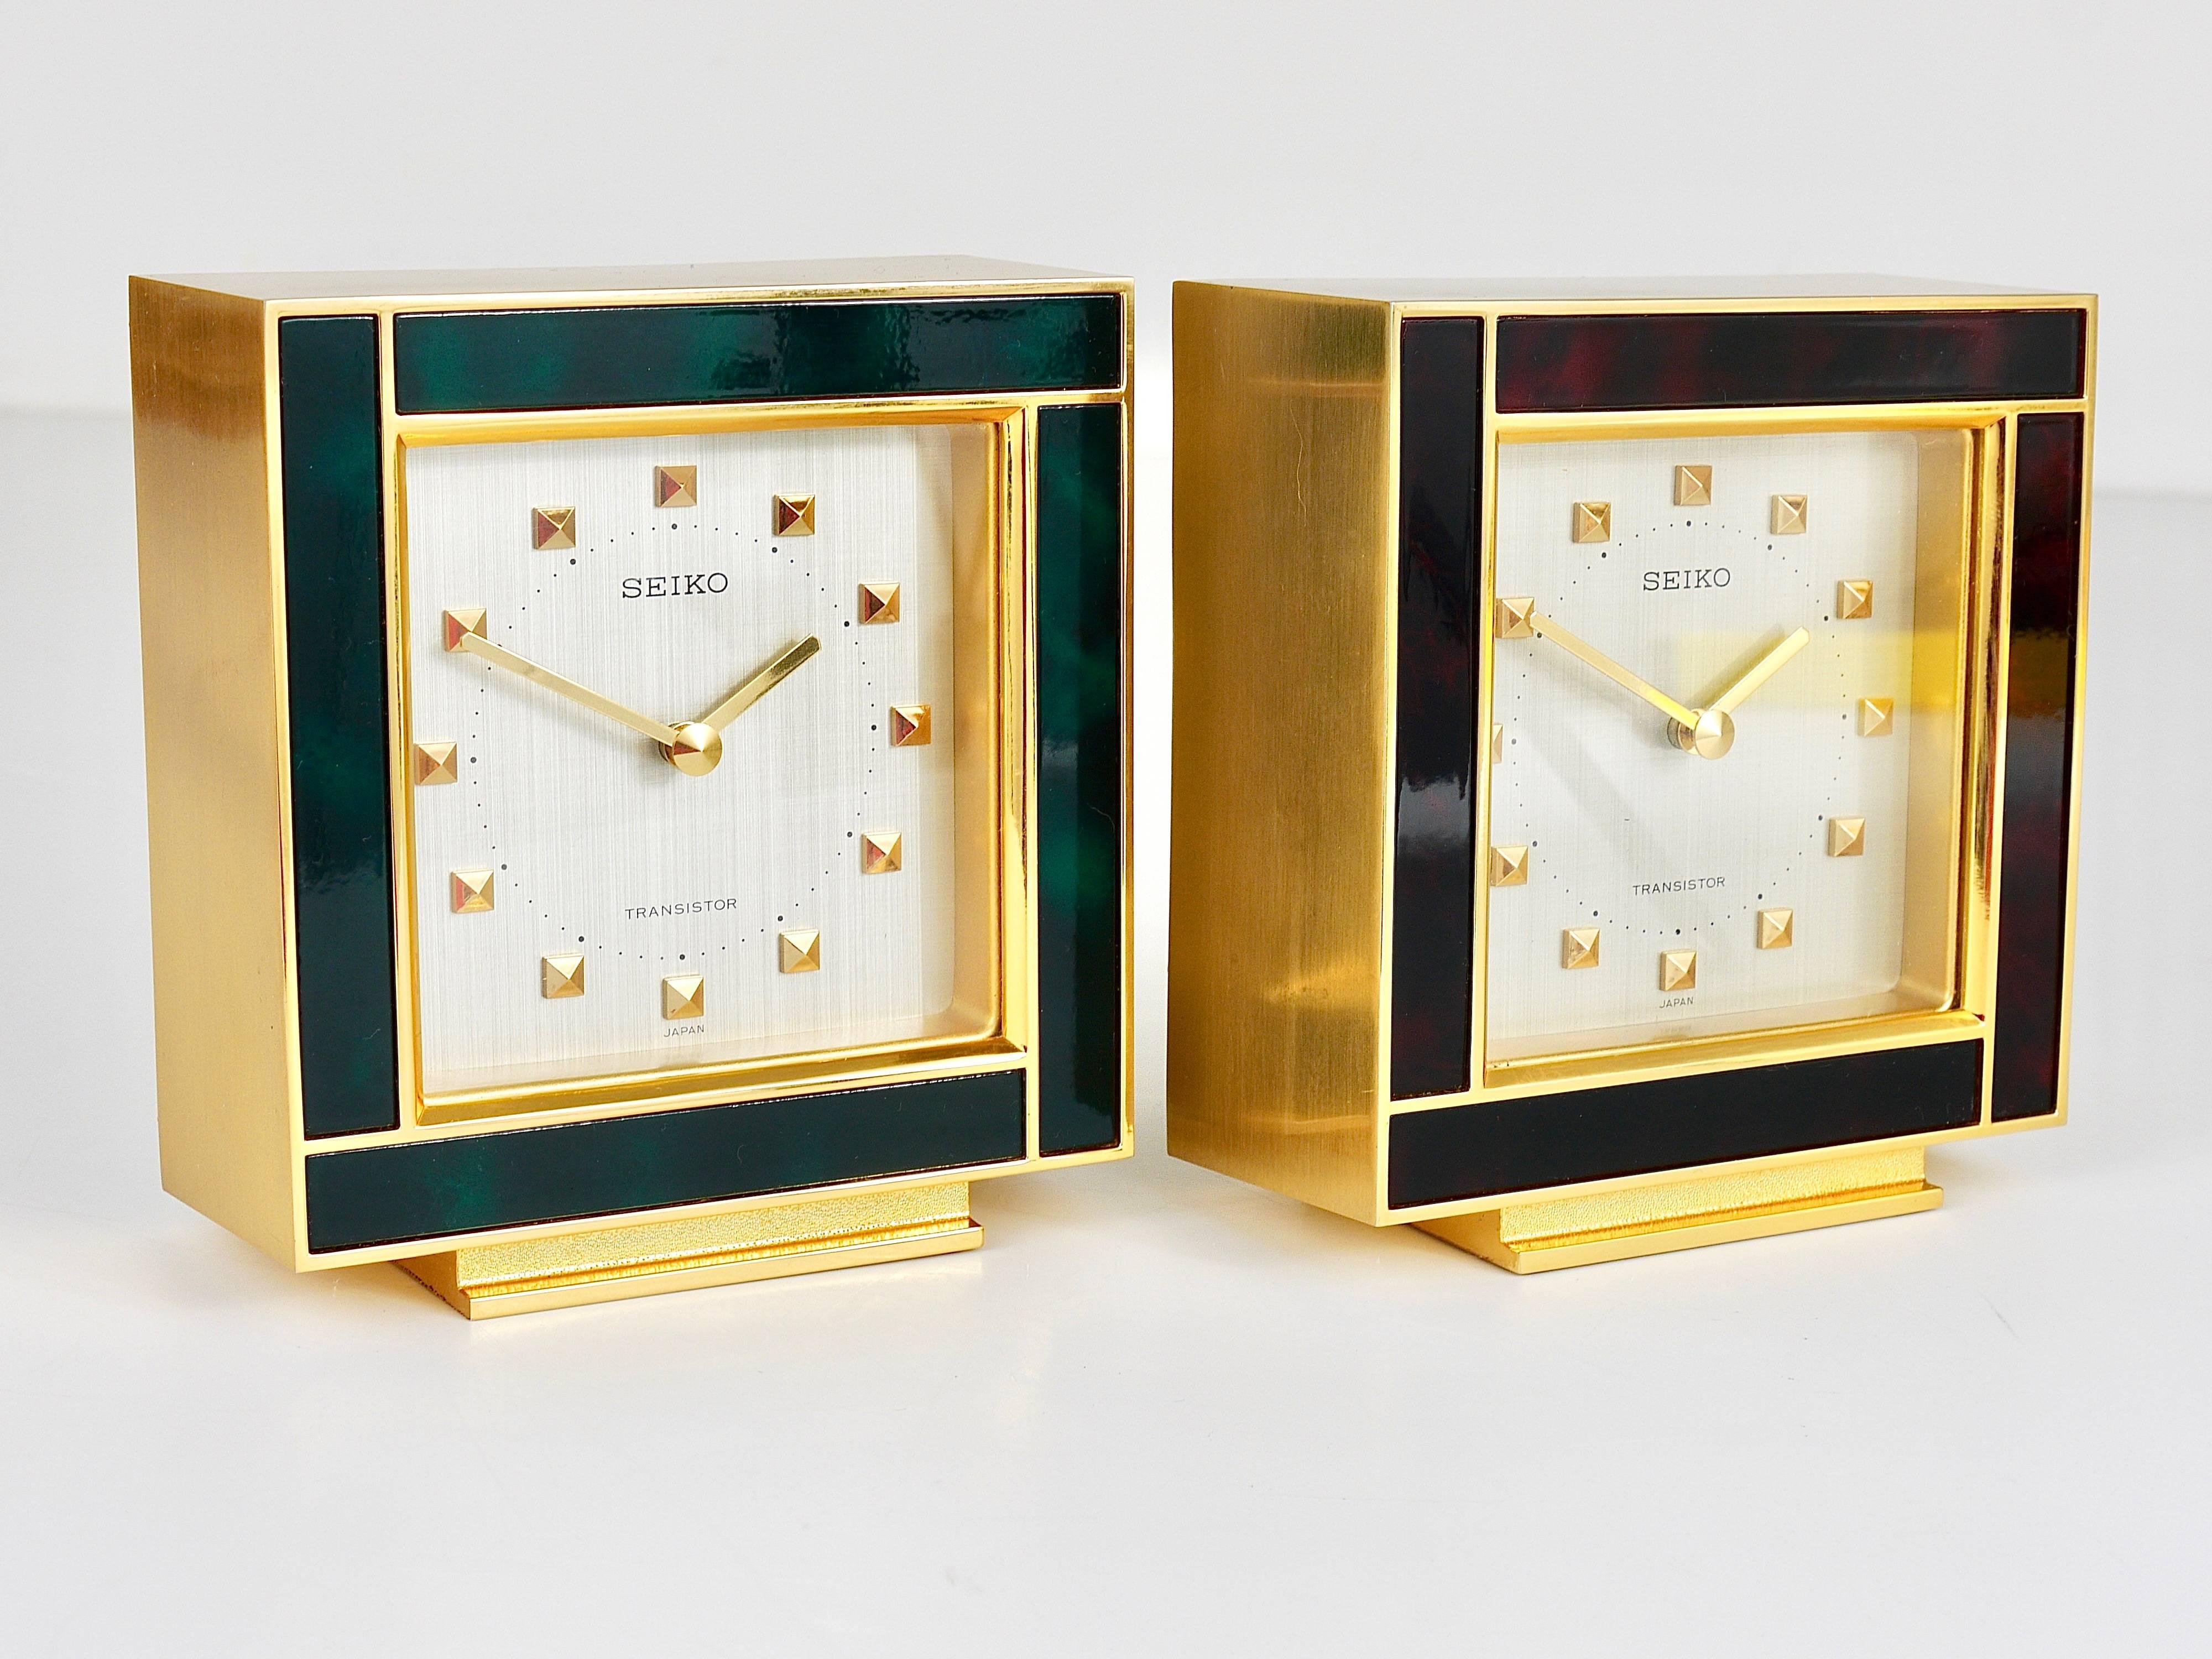 A decorative Hollywood Regency desk- or table clock from the 1970s. It has a gold-finished housing with a green Chinese lacquer frame on its front. Executed by Seiko, Japan. In excellent condition. We offer an identical clock but with a brown frame